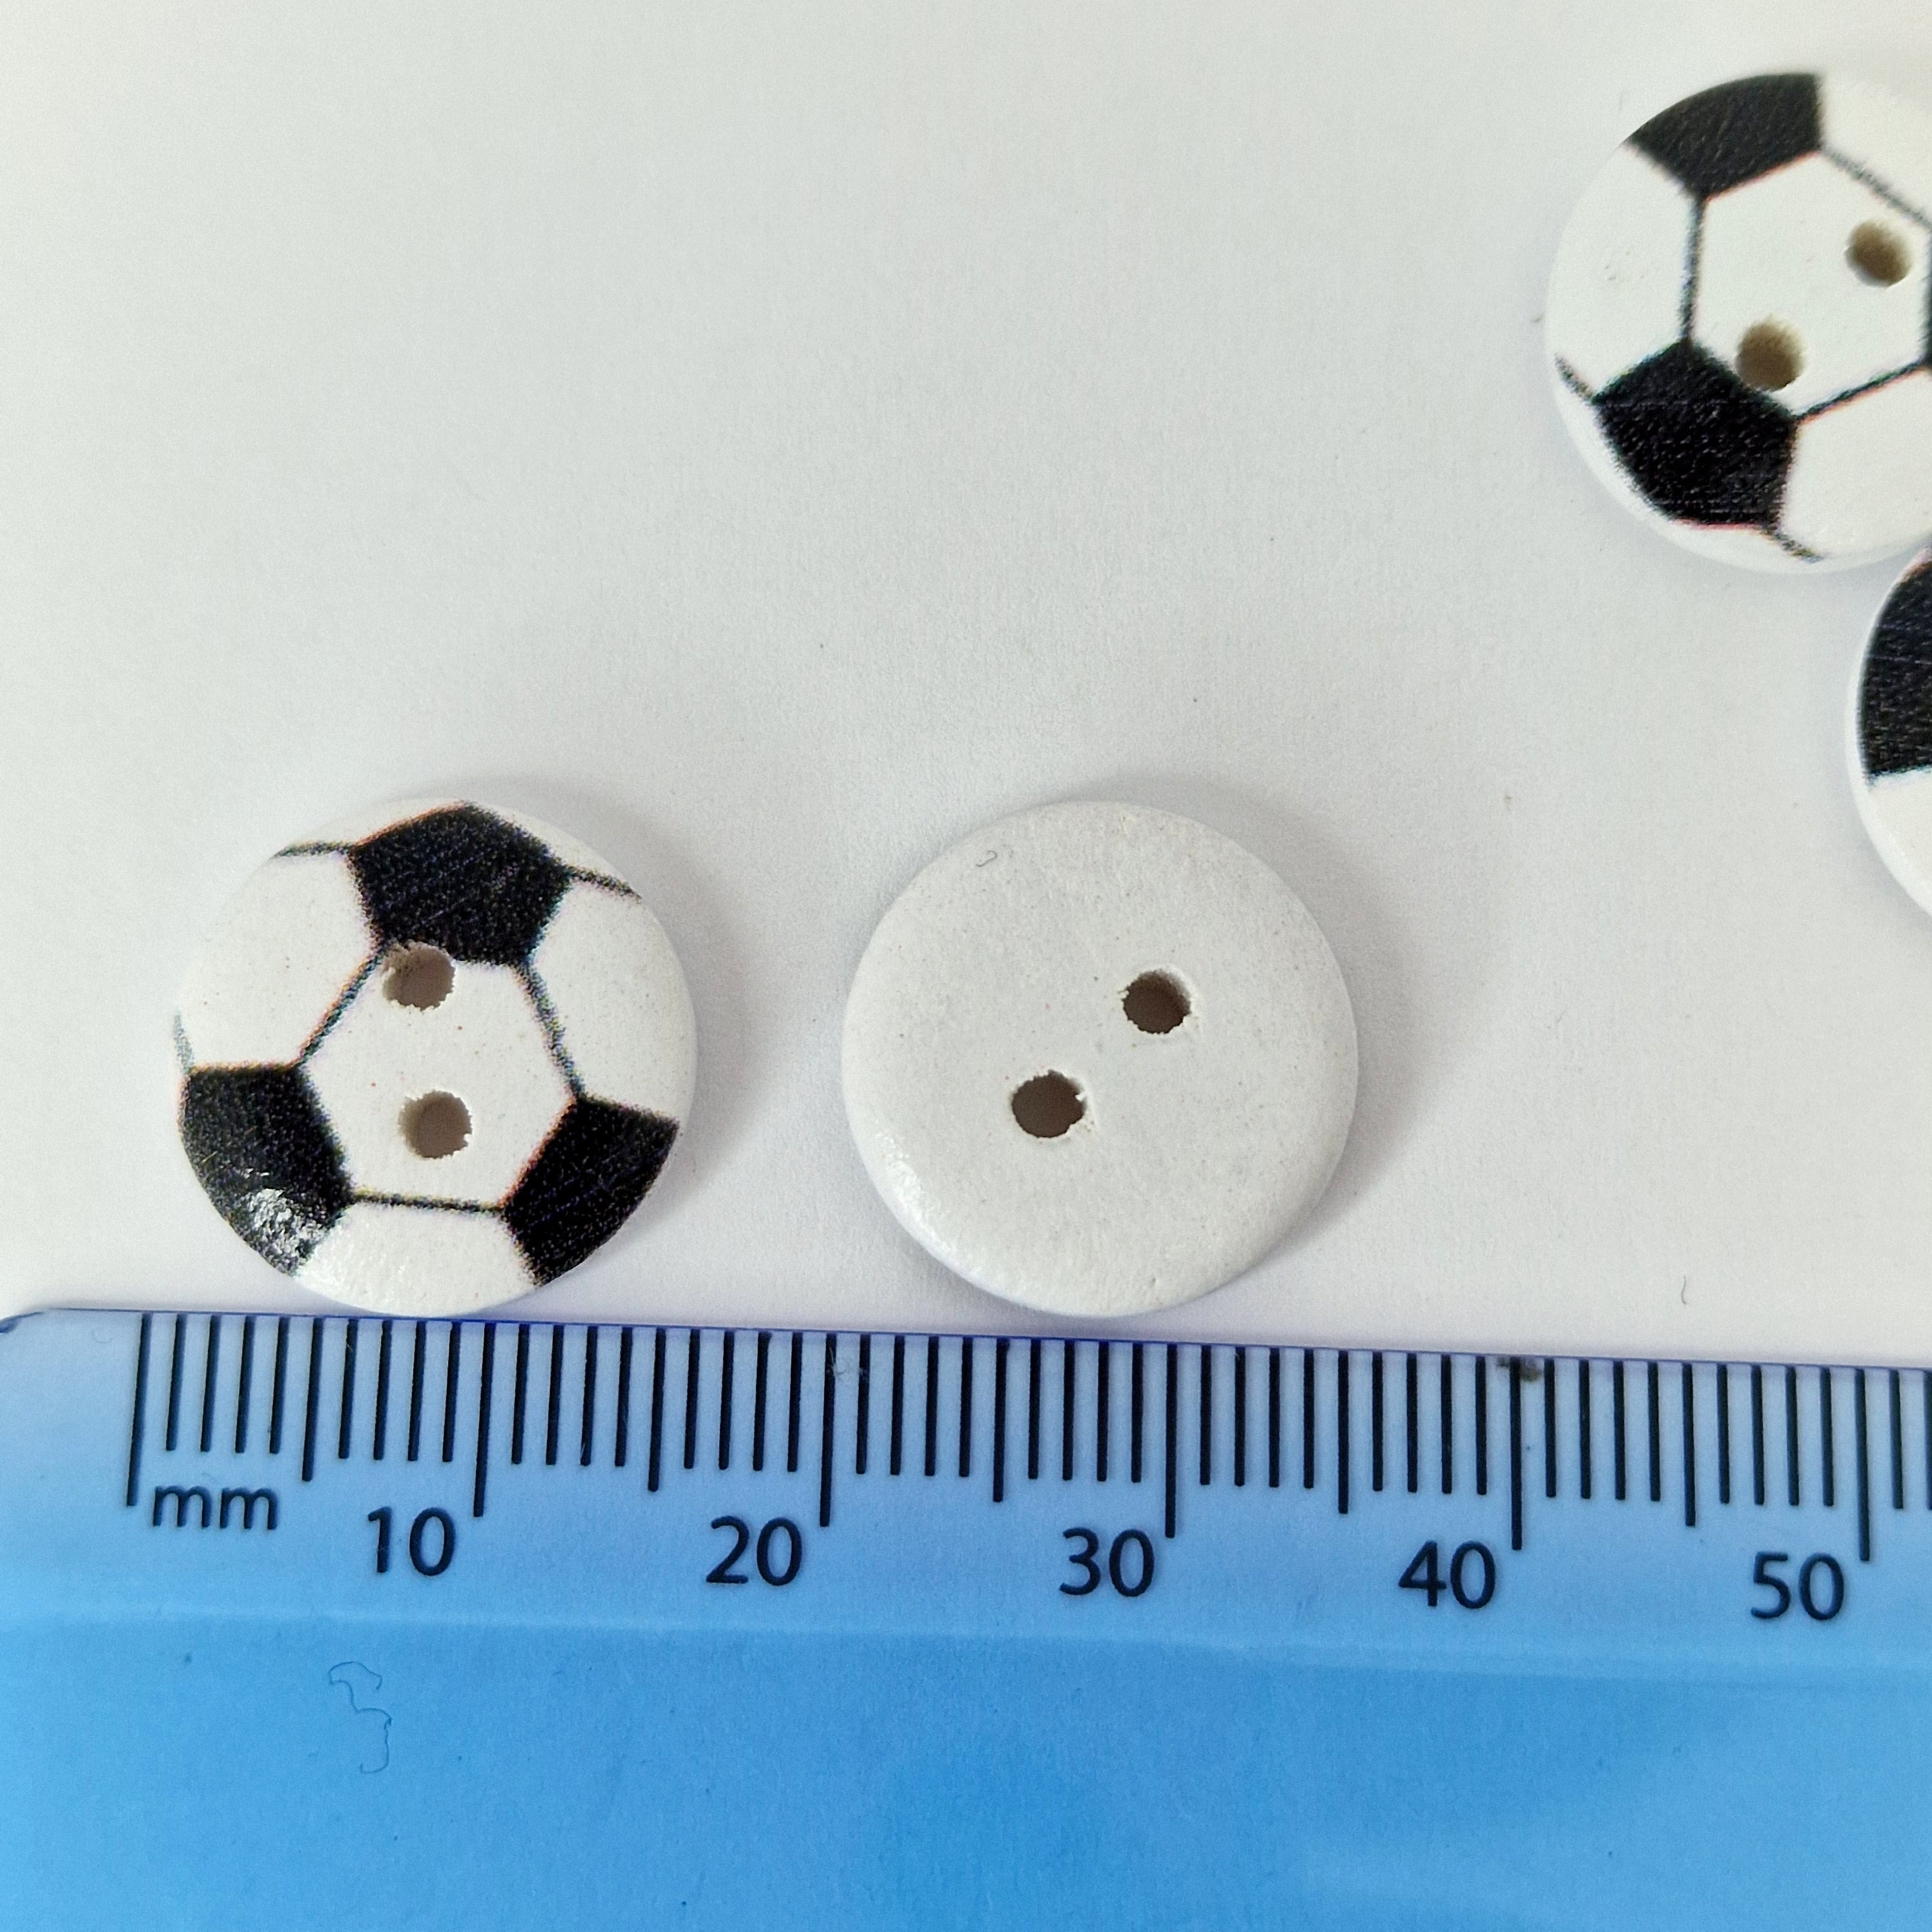 MajorCrafts 40pcs 15mm Black and White Football Round 2 Holes Wood Sewing Buttons